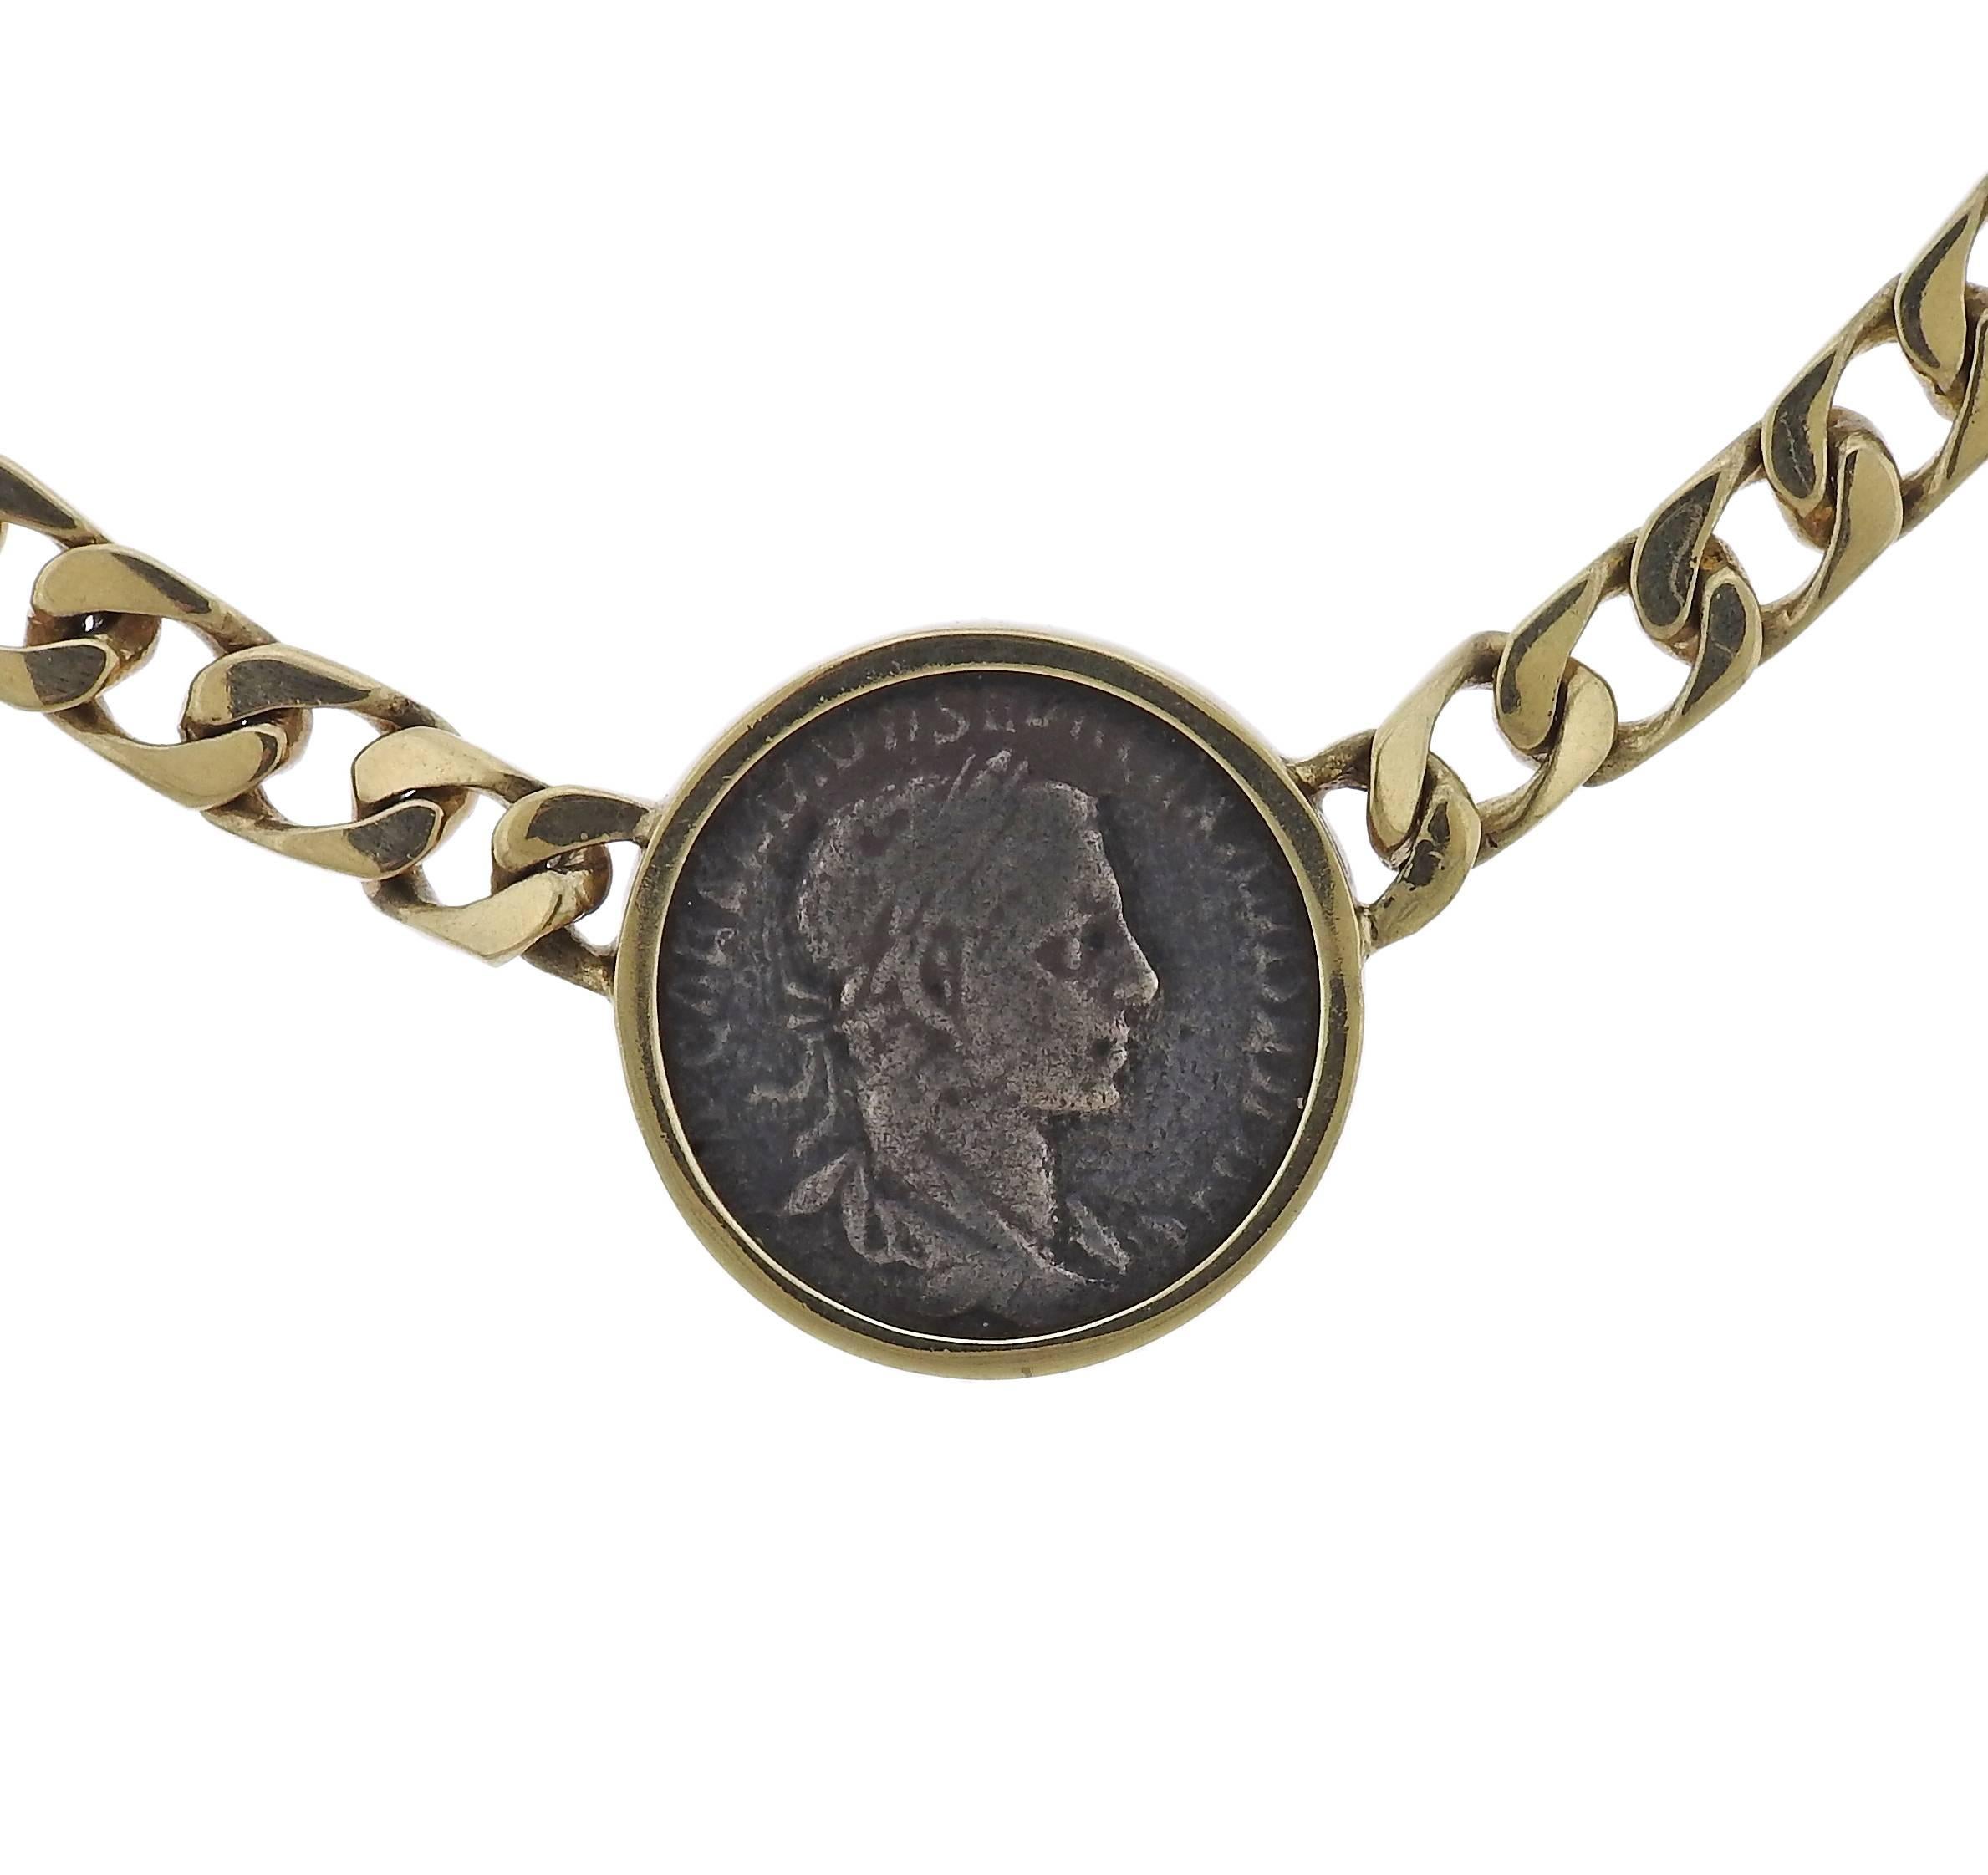 An 18k yellow gold chain necklace, set with ancient coin in the center. Necklace is 14 1/2" long, pendant - 29mm in diameter. Weight of the piece - 80.3 grams 